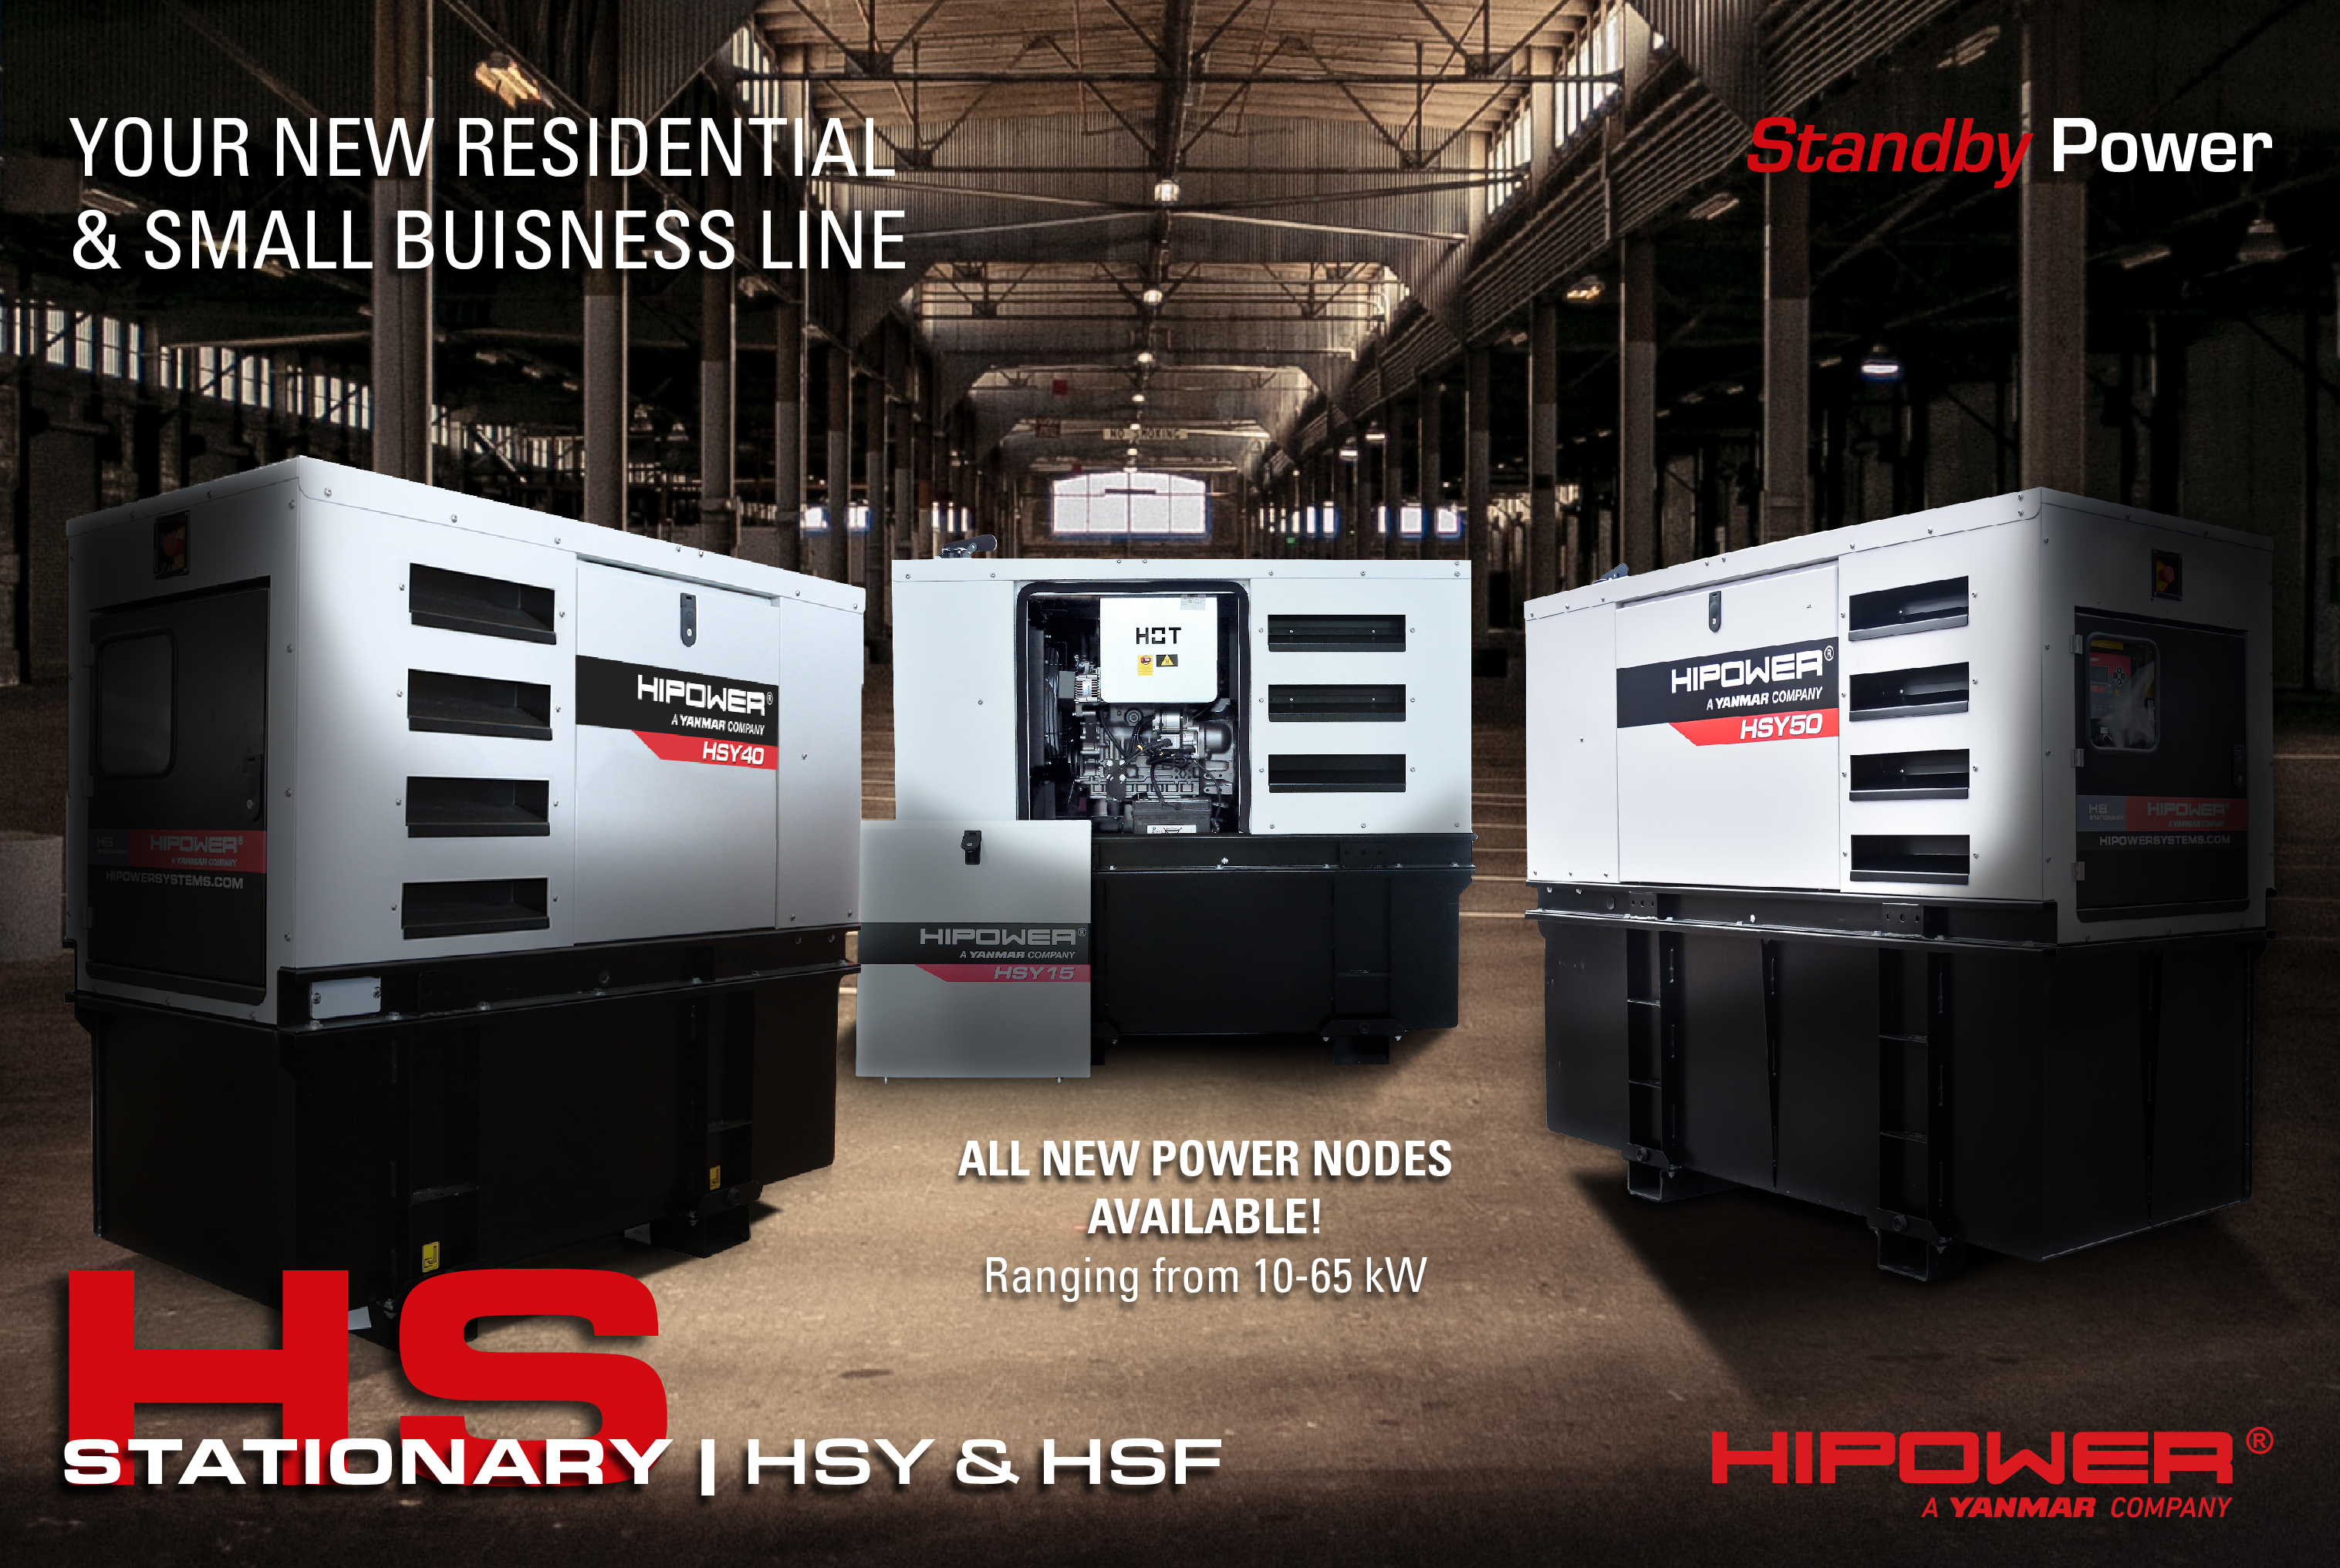 HS Stationary - New Residential & Small Business Line